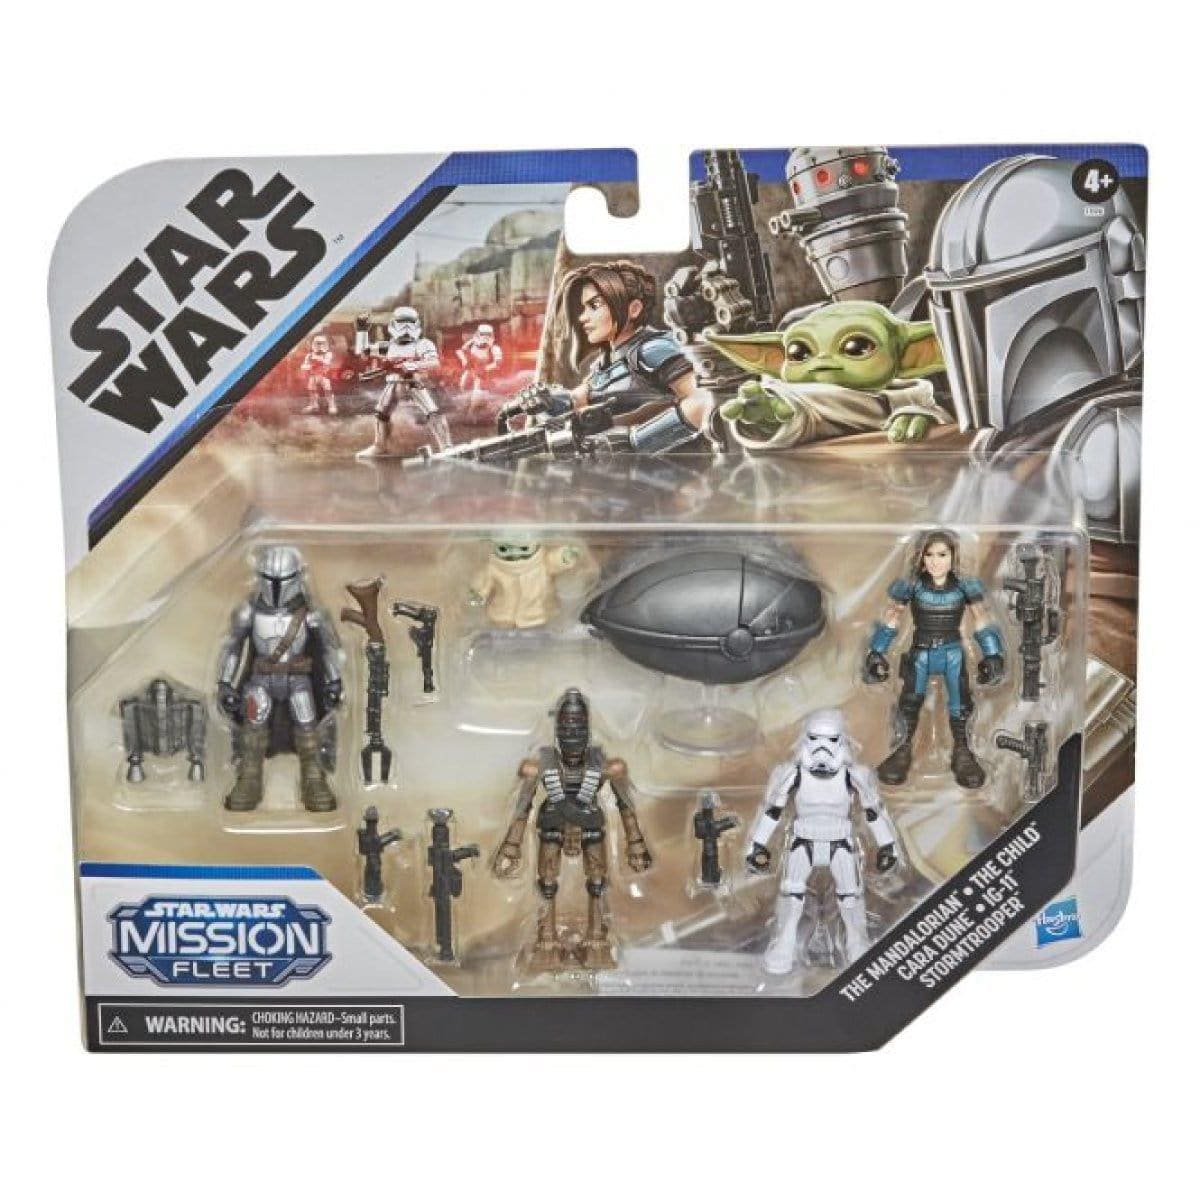 Buy Games Star Wars Action Figures Build Out Pack, The Mandalorian sold at Party Expert